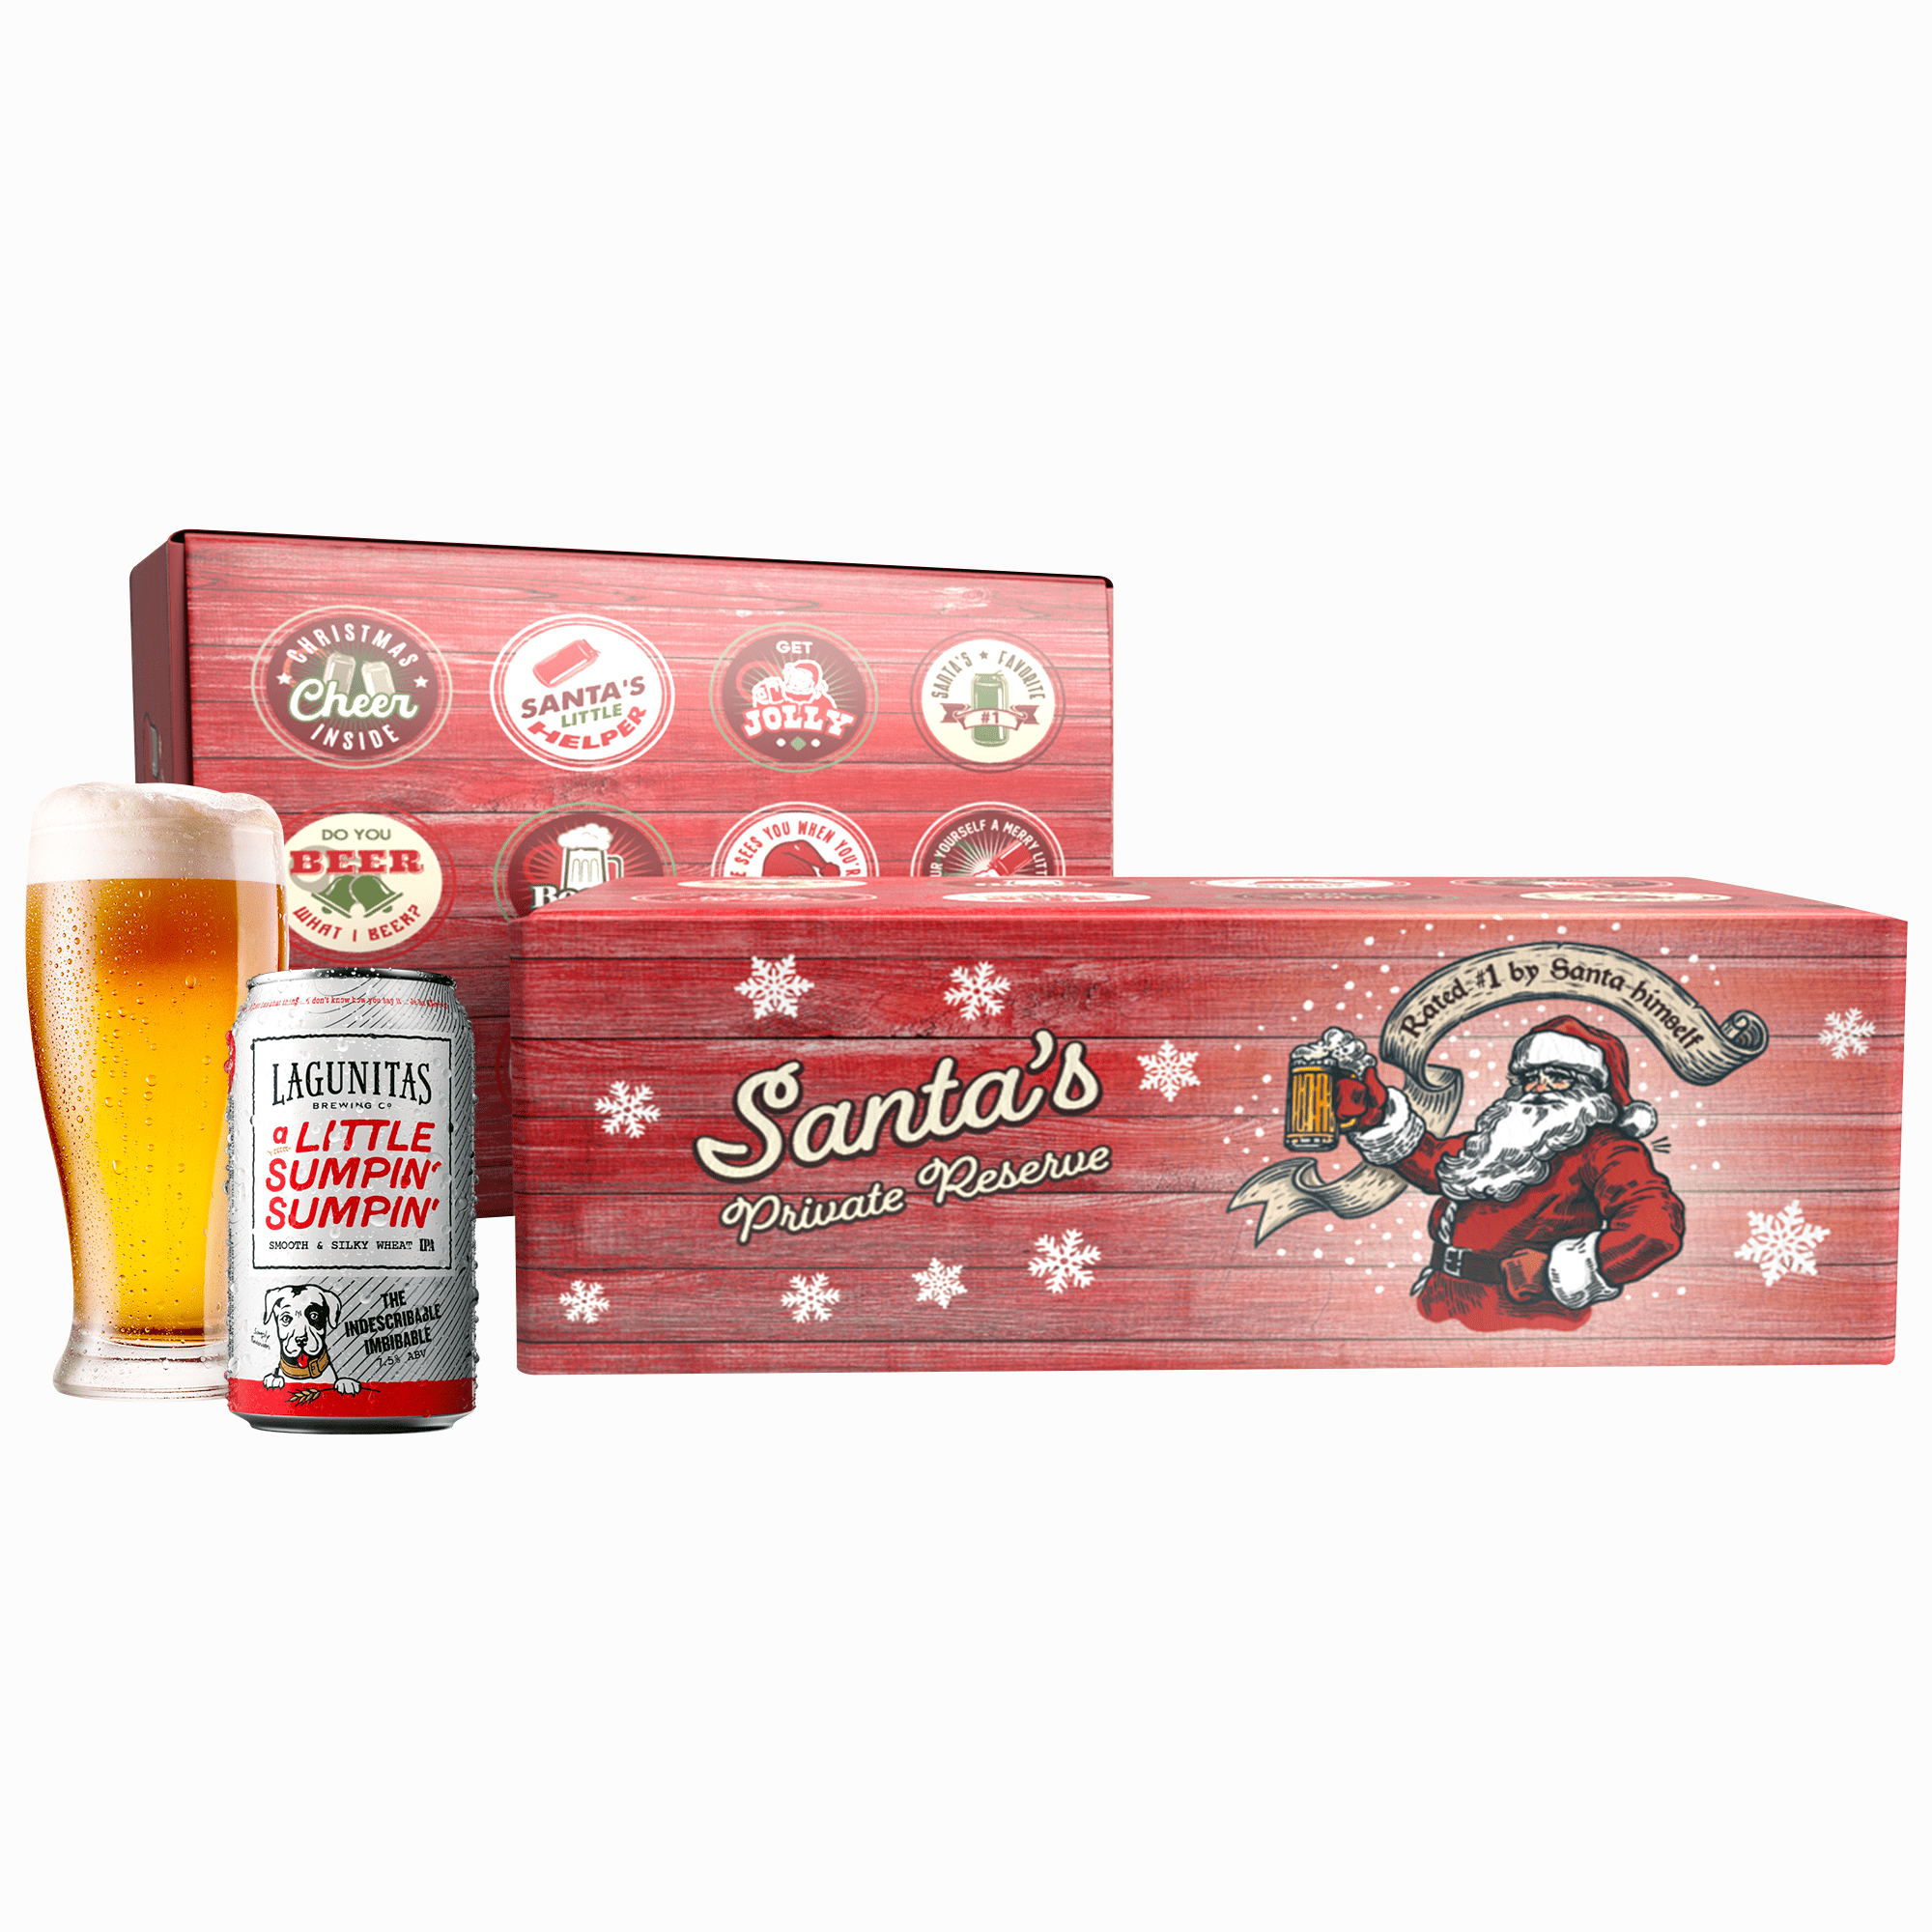 Best Gifts for Beer Lovers: Guide to the Top Beer Gifts of 2022